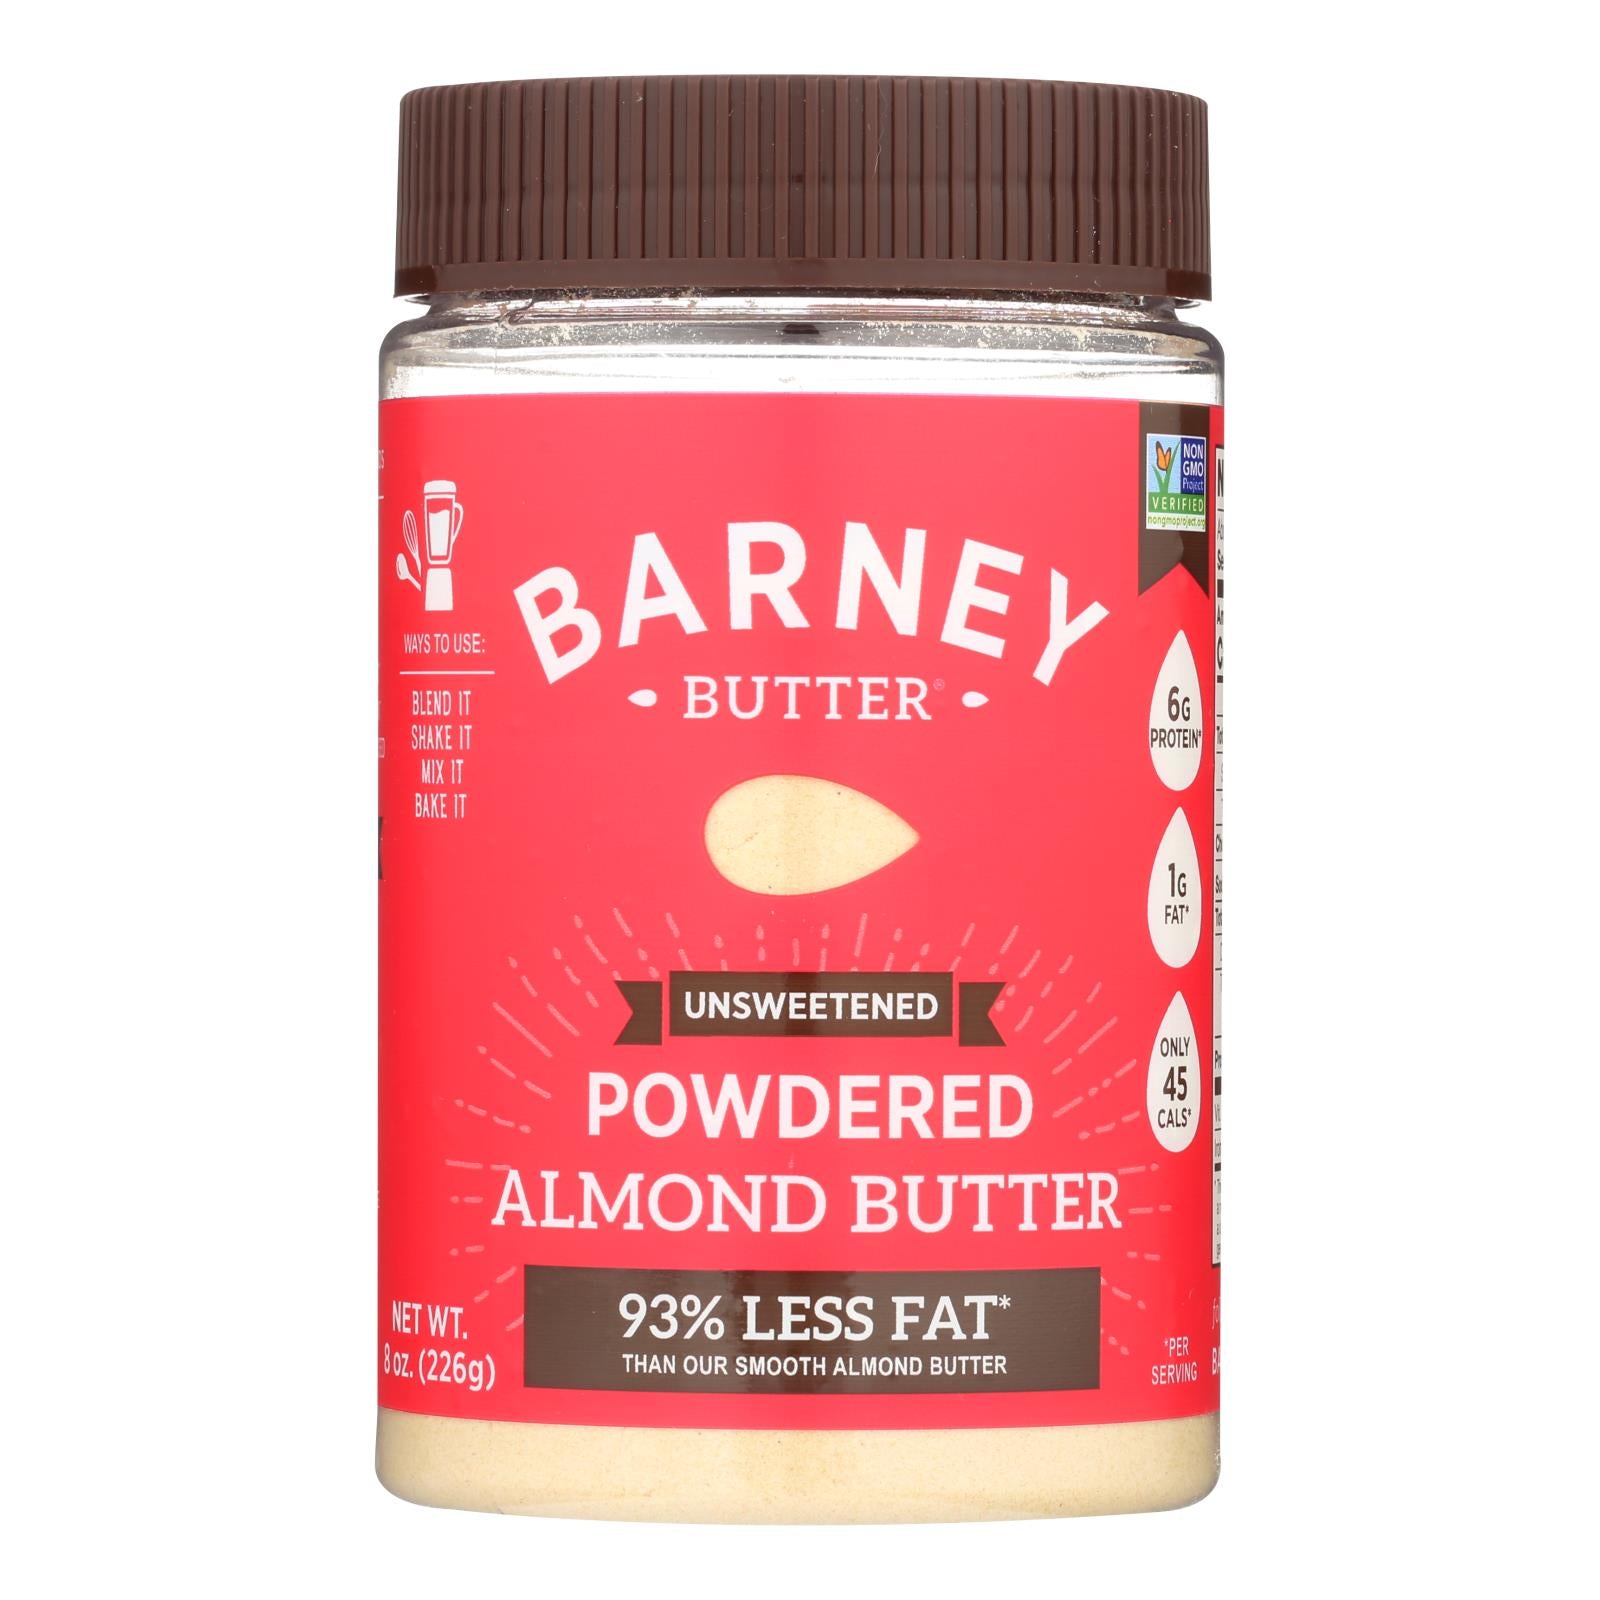 Barney Butter, Barney Butter Powdered Almond Butter - Case of 6 - 8 OZ (Pack of 6)